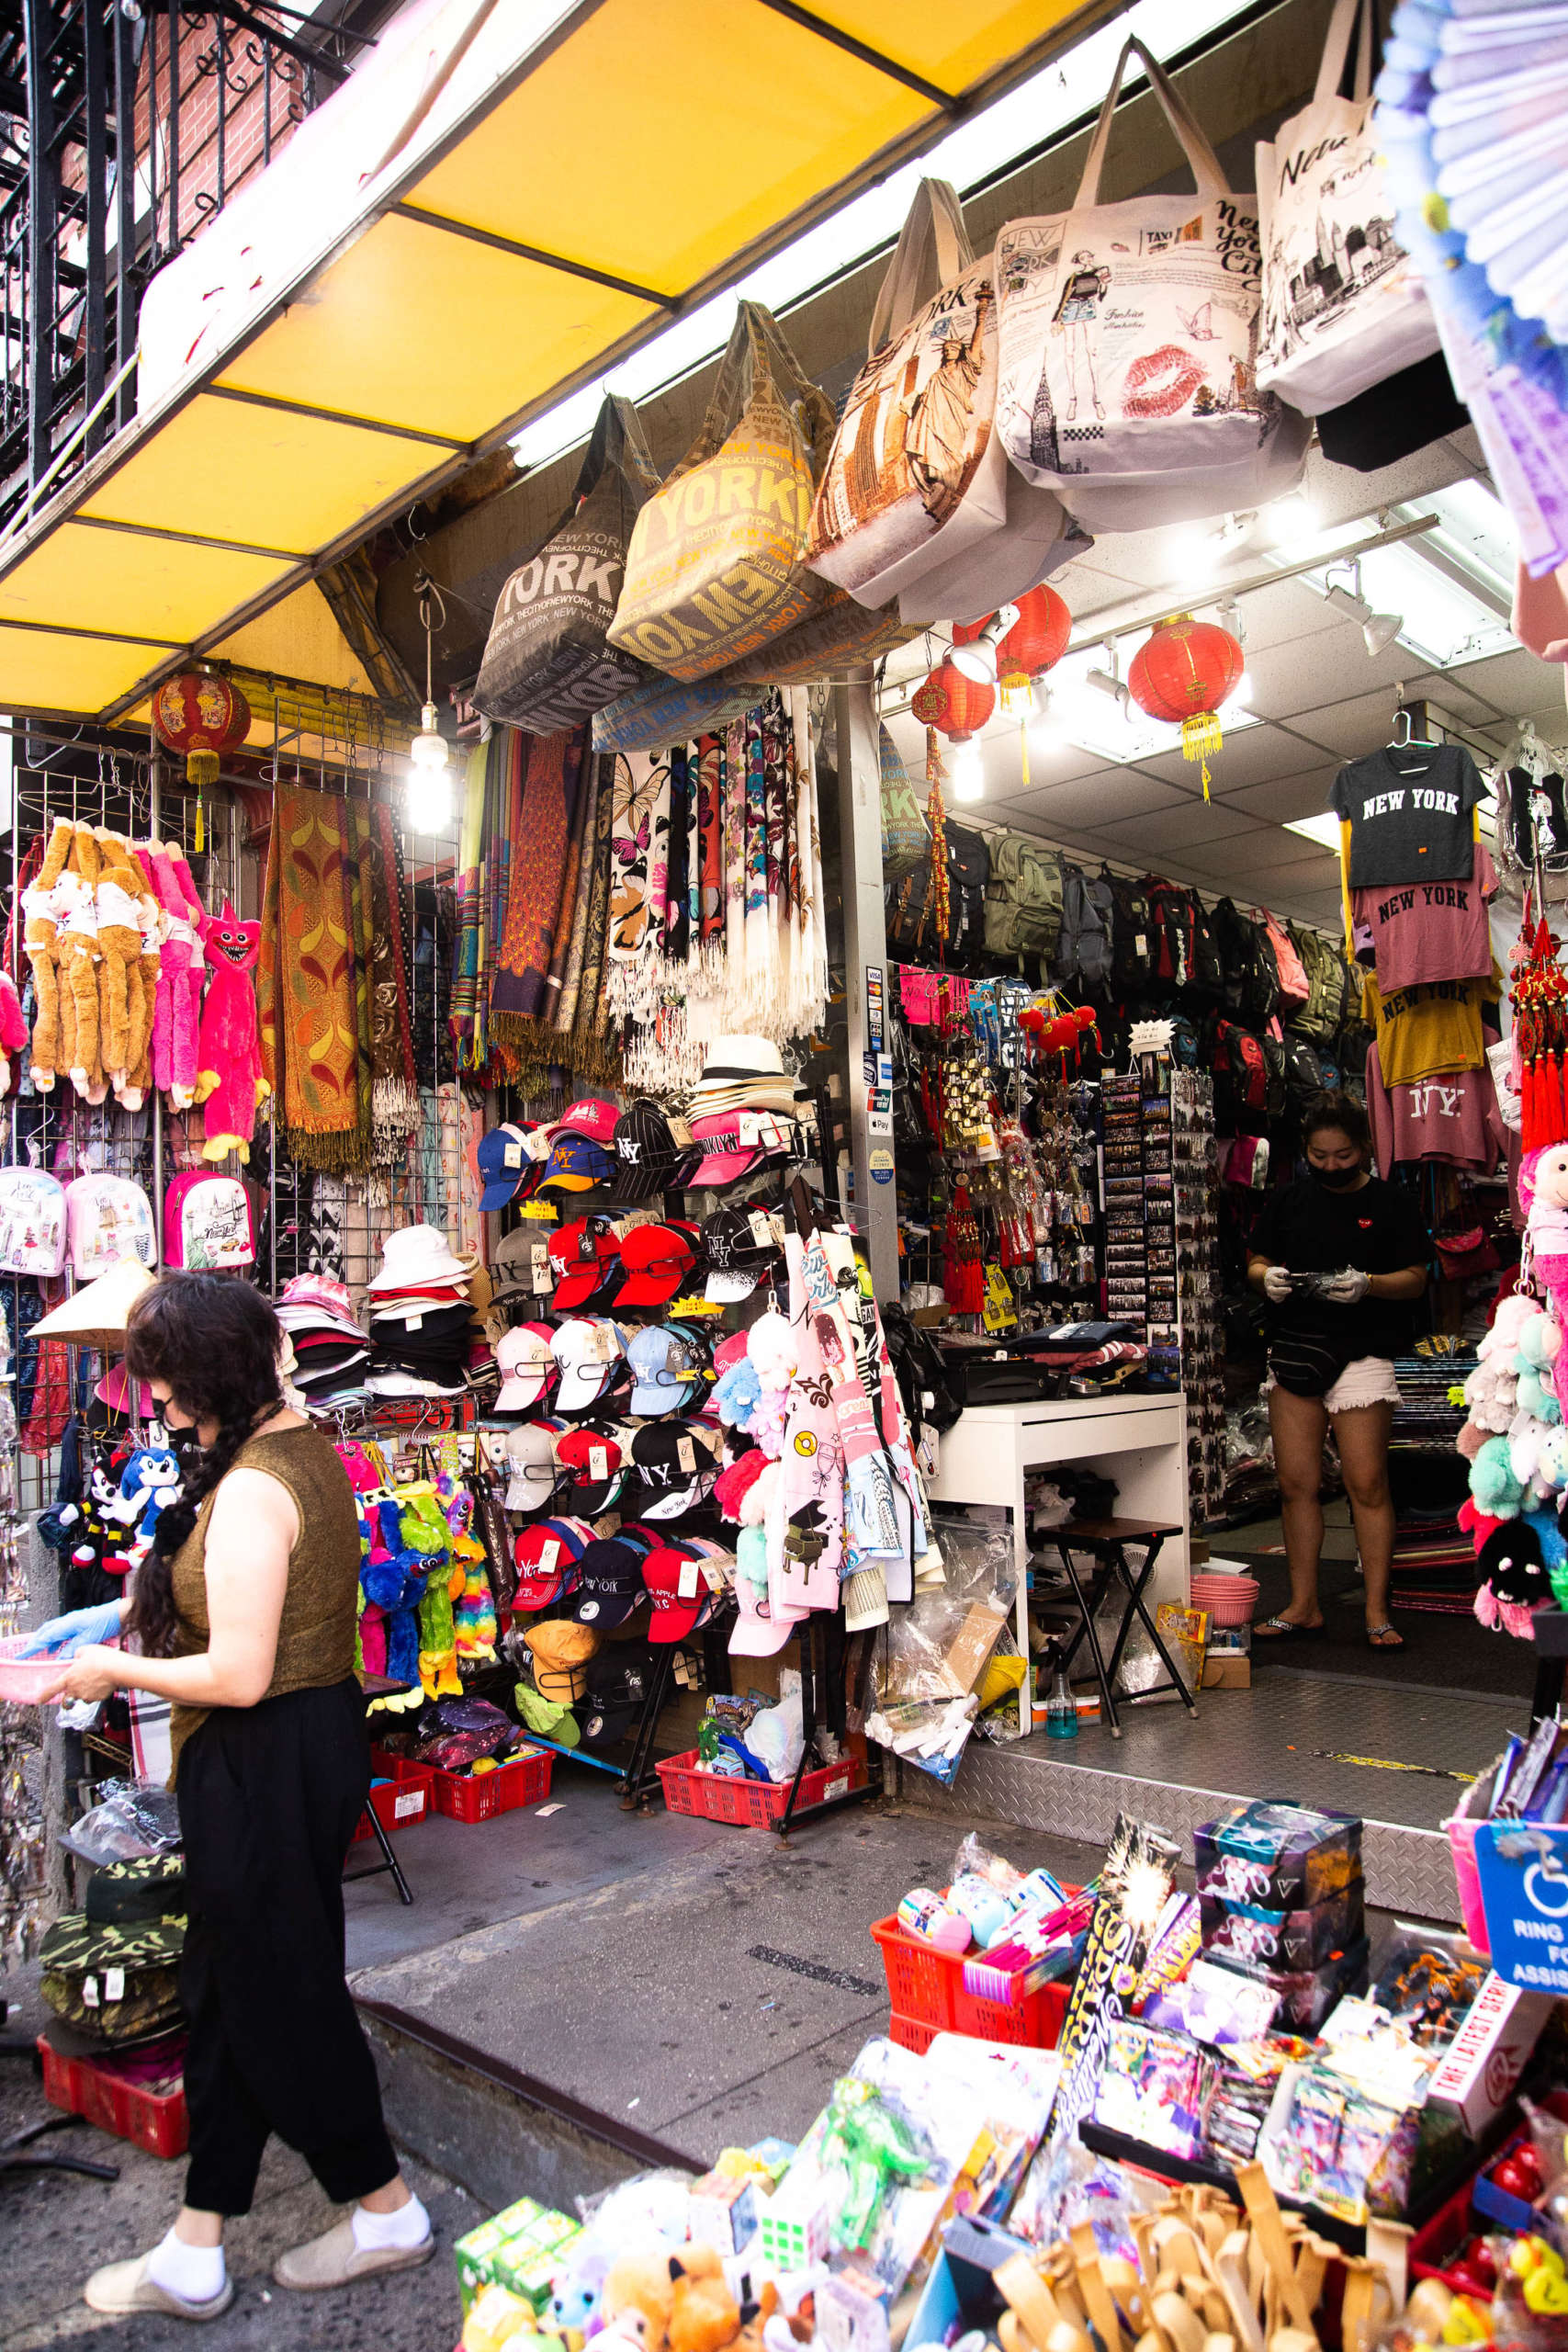 An open storefront in Chinatown, NYC, covered in unique gifts and souvenirs. Patterned tote bags hang from the roof next to paper lanterns; hats, scarves, puppets, toys, and red baskets of additional merchandise cover the walls and sit on tables. Inside, T-shirts, magnets, backpacks, and more are displayed. A person stands near the front of the open area, looking through a pink bowl; another stands inside the shop looking down at their phone.